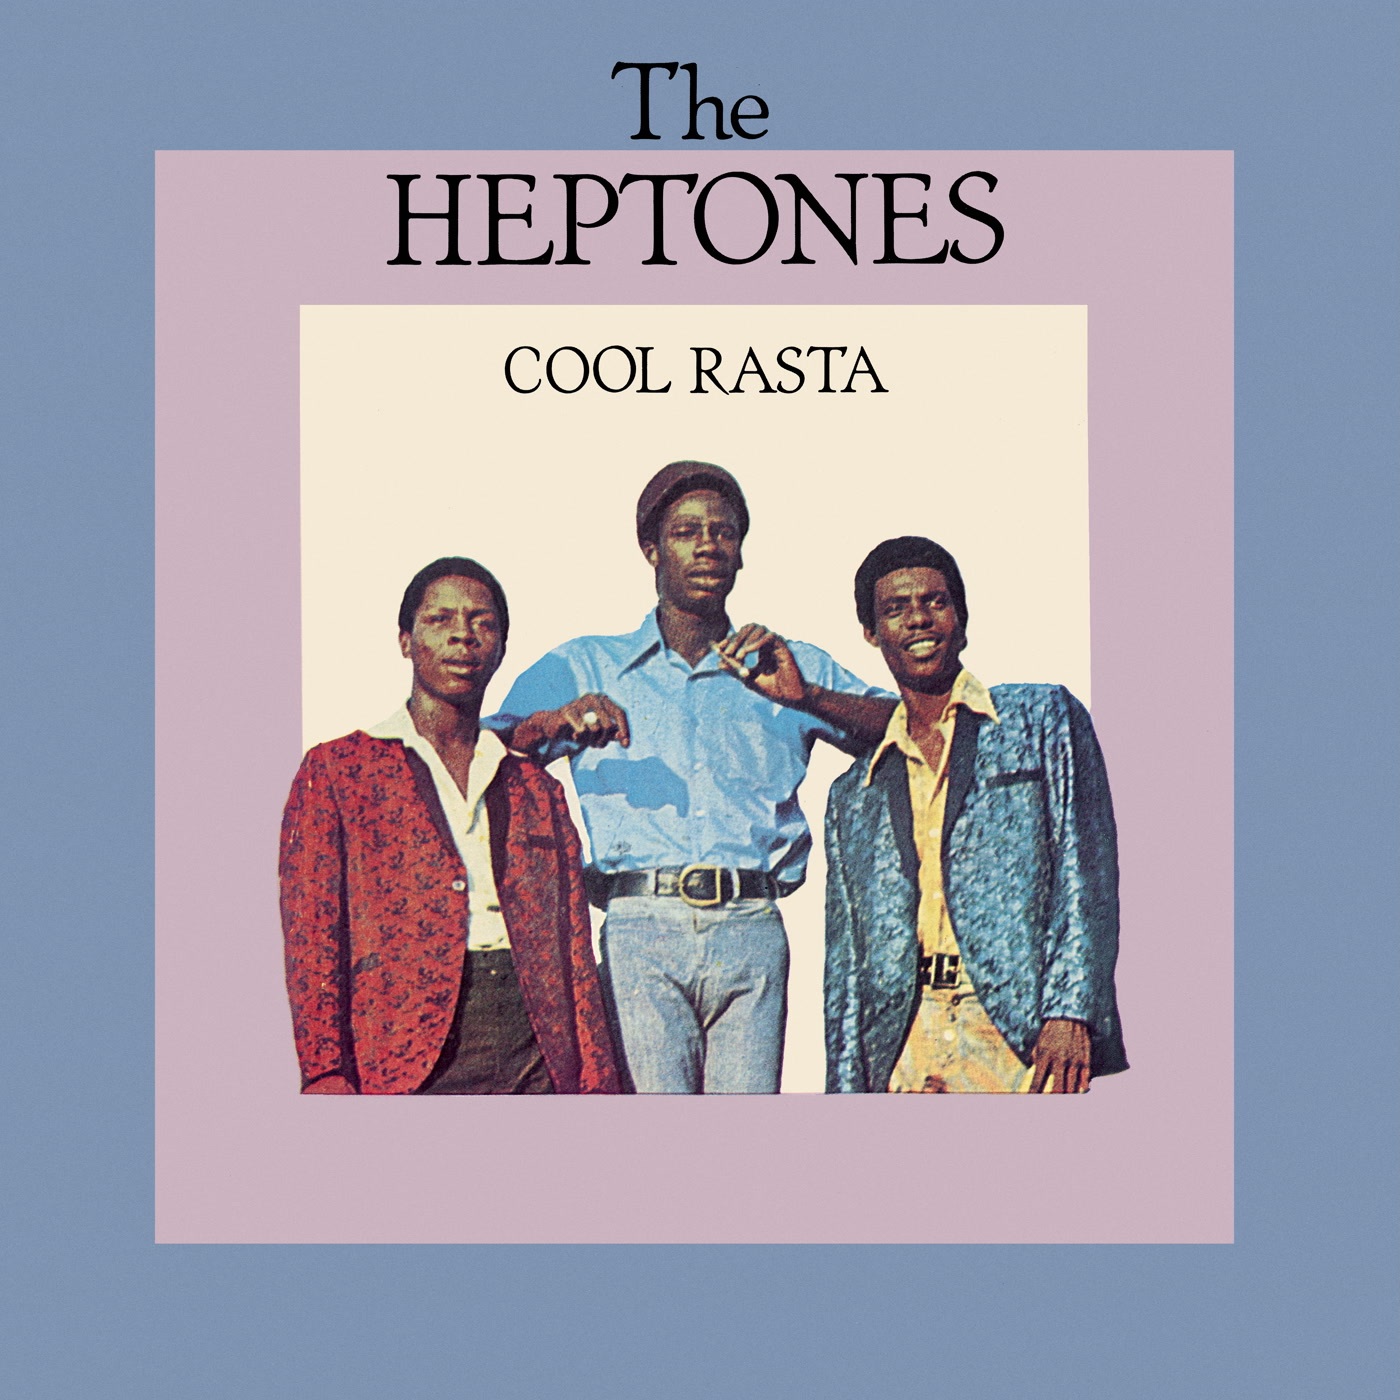 The Heptones – Cool Rasta (On High Records)